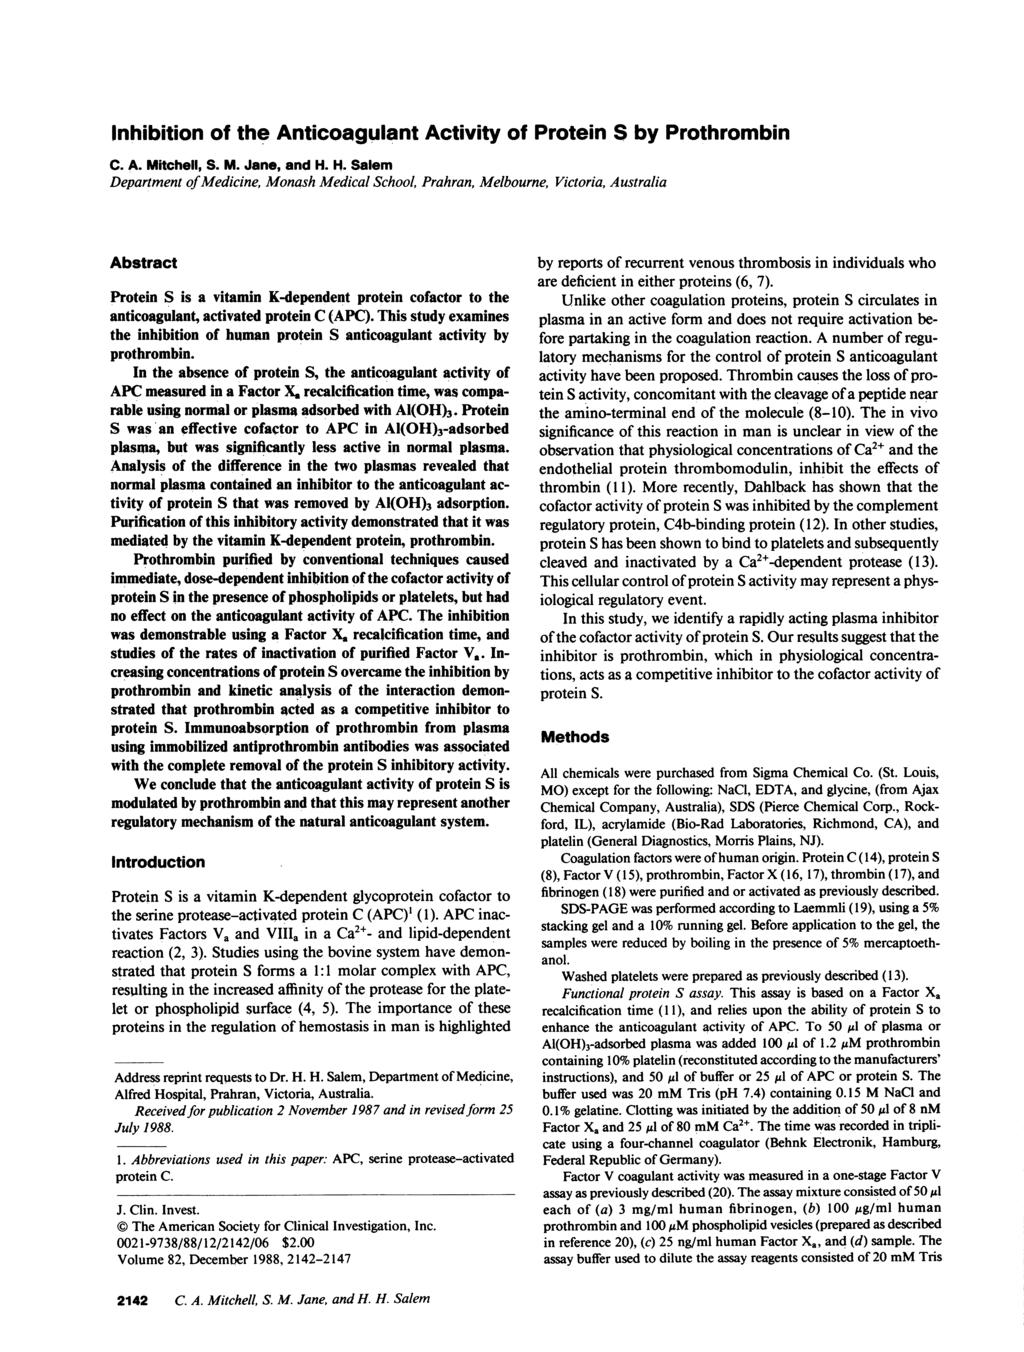 Inhibition of the Anticoagulant Activity of Protein S by Prothrombin C. A. Mitchell, S. M. Jane, and H.